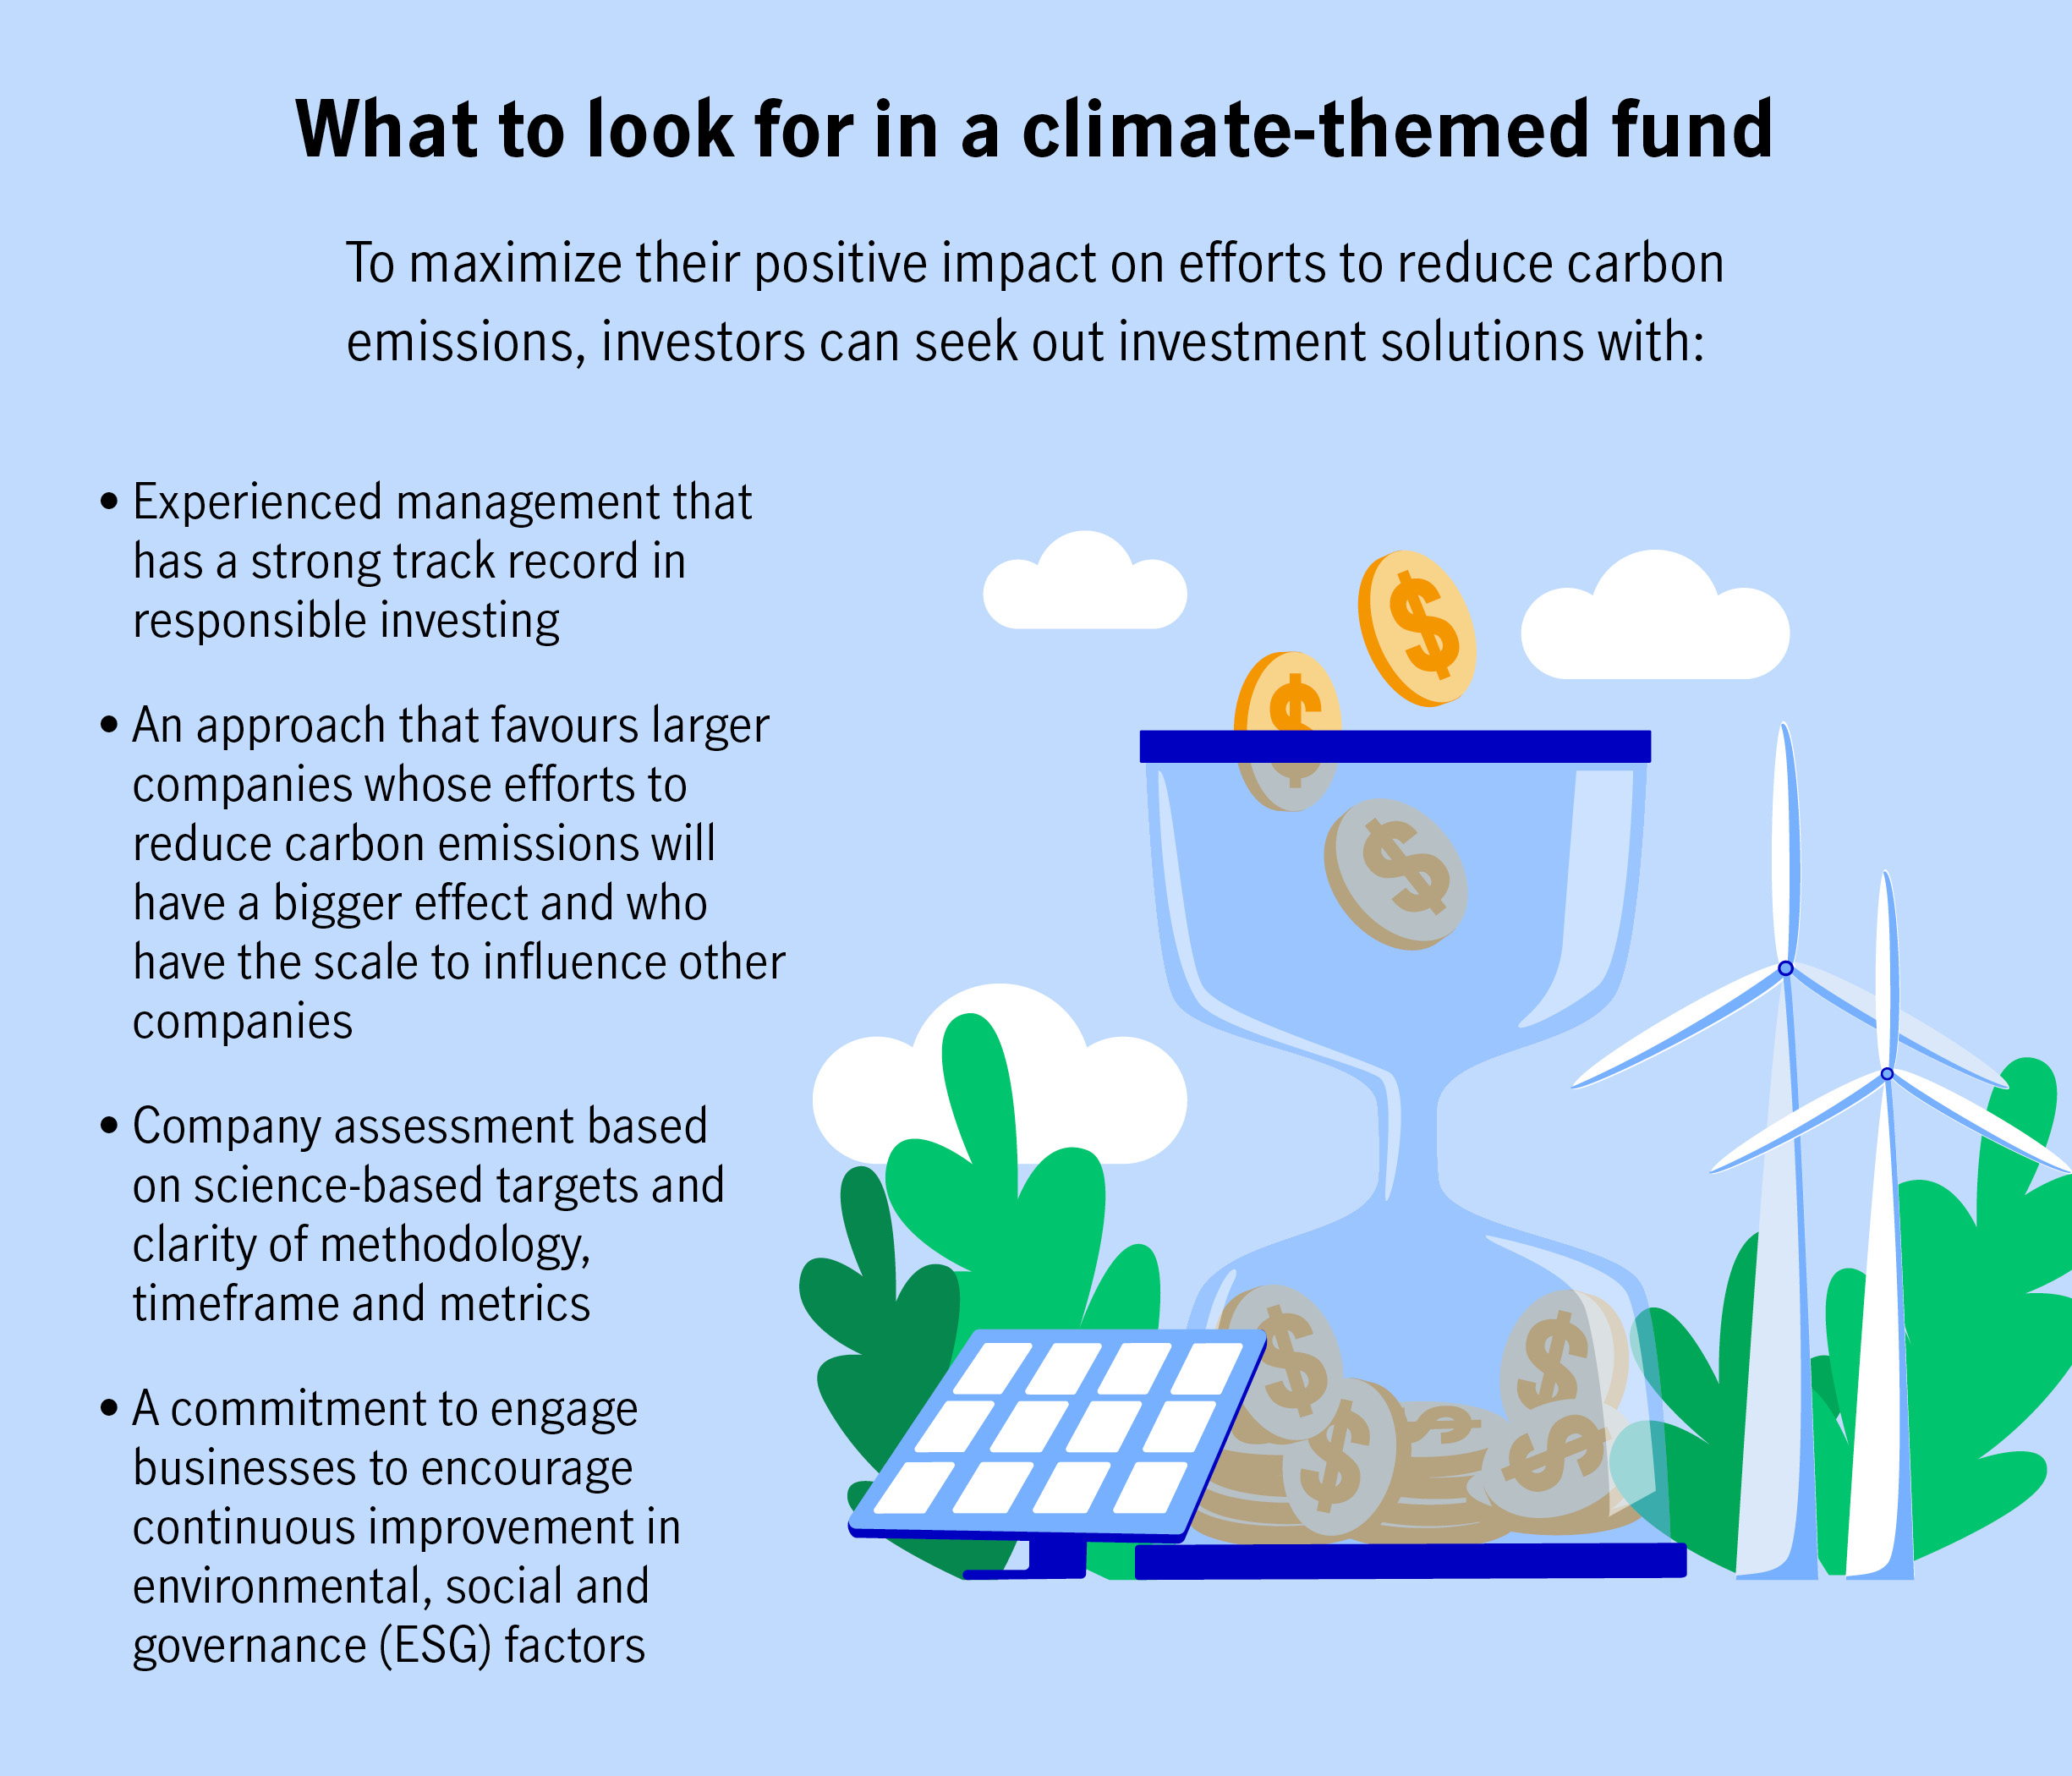 To maximize their positive impact on efforts to reduce carbon emissions, investors can seek out investment solutions with:  Experienced management that has a strong track record in responsible investing. An approach that favours larger companies whose efforts to reduce carbon emissions will have a bigger effect and who have the scale to influence other companies. Company assessment based on science-based targets and clarity of methodology, timeframe and metrics.  A commitment to engage businesses to encourage continuous improvement in environmental, social and governance (ESG) factors.